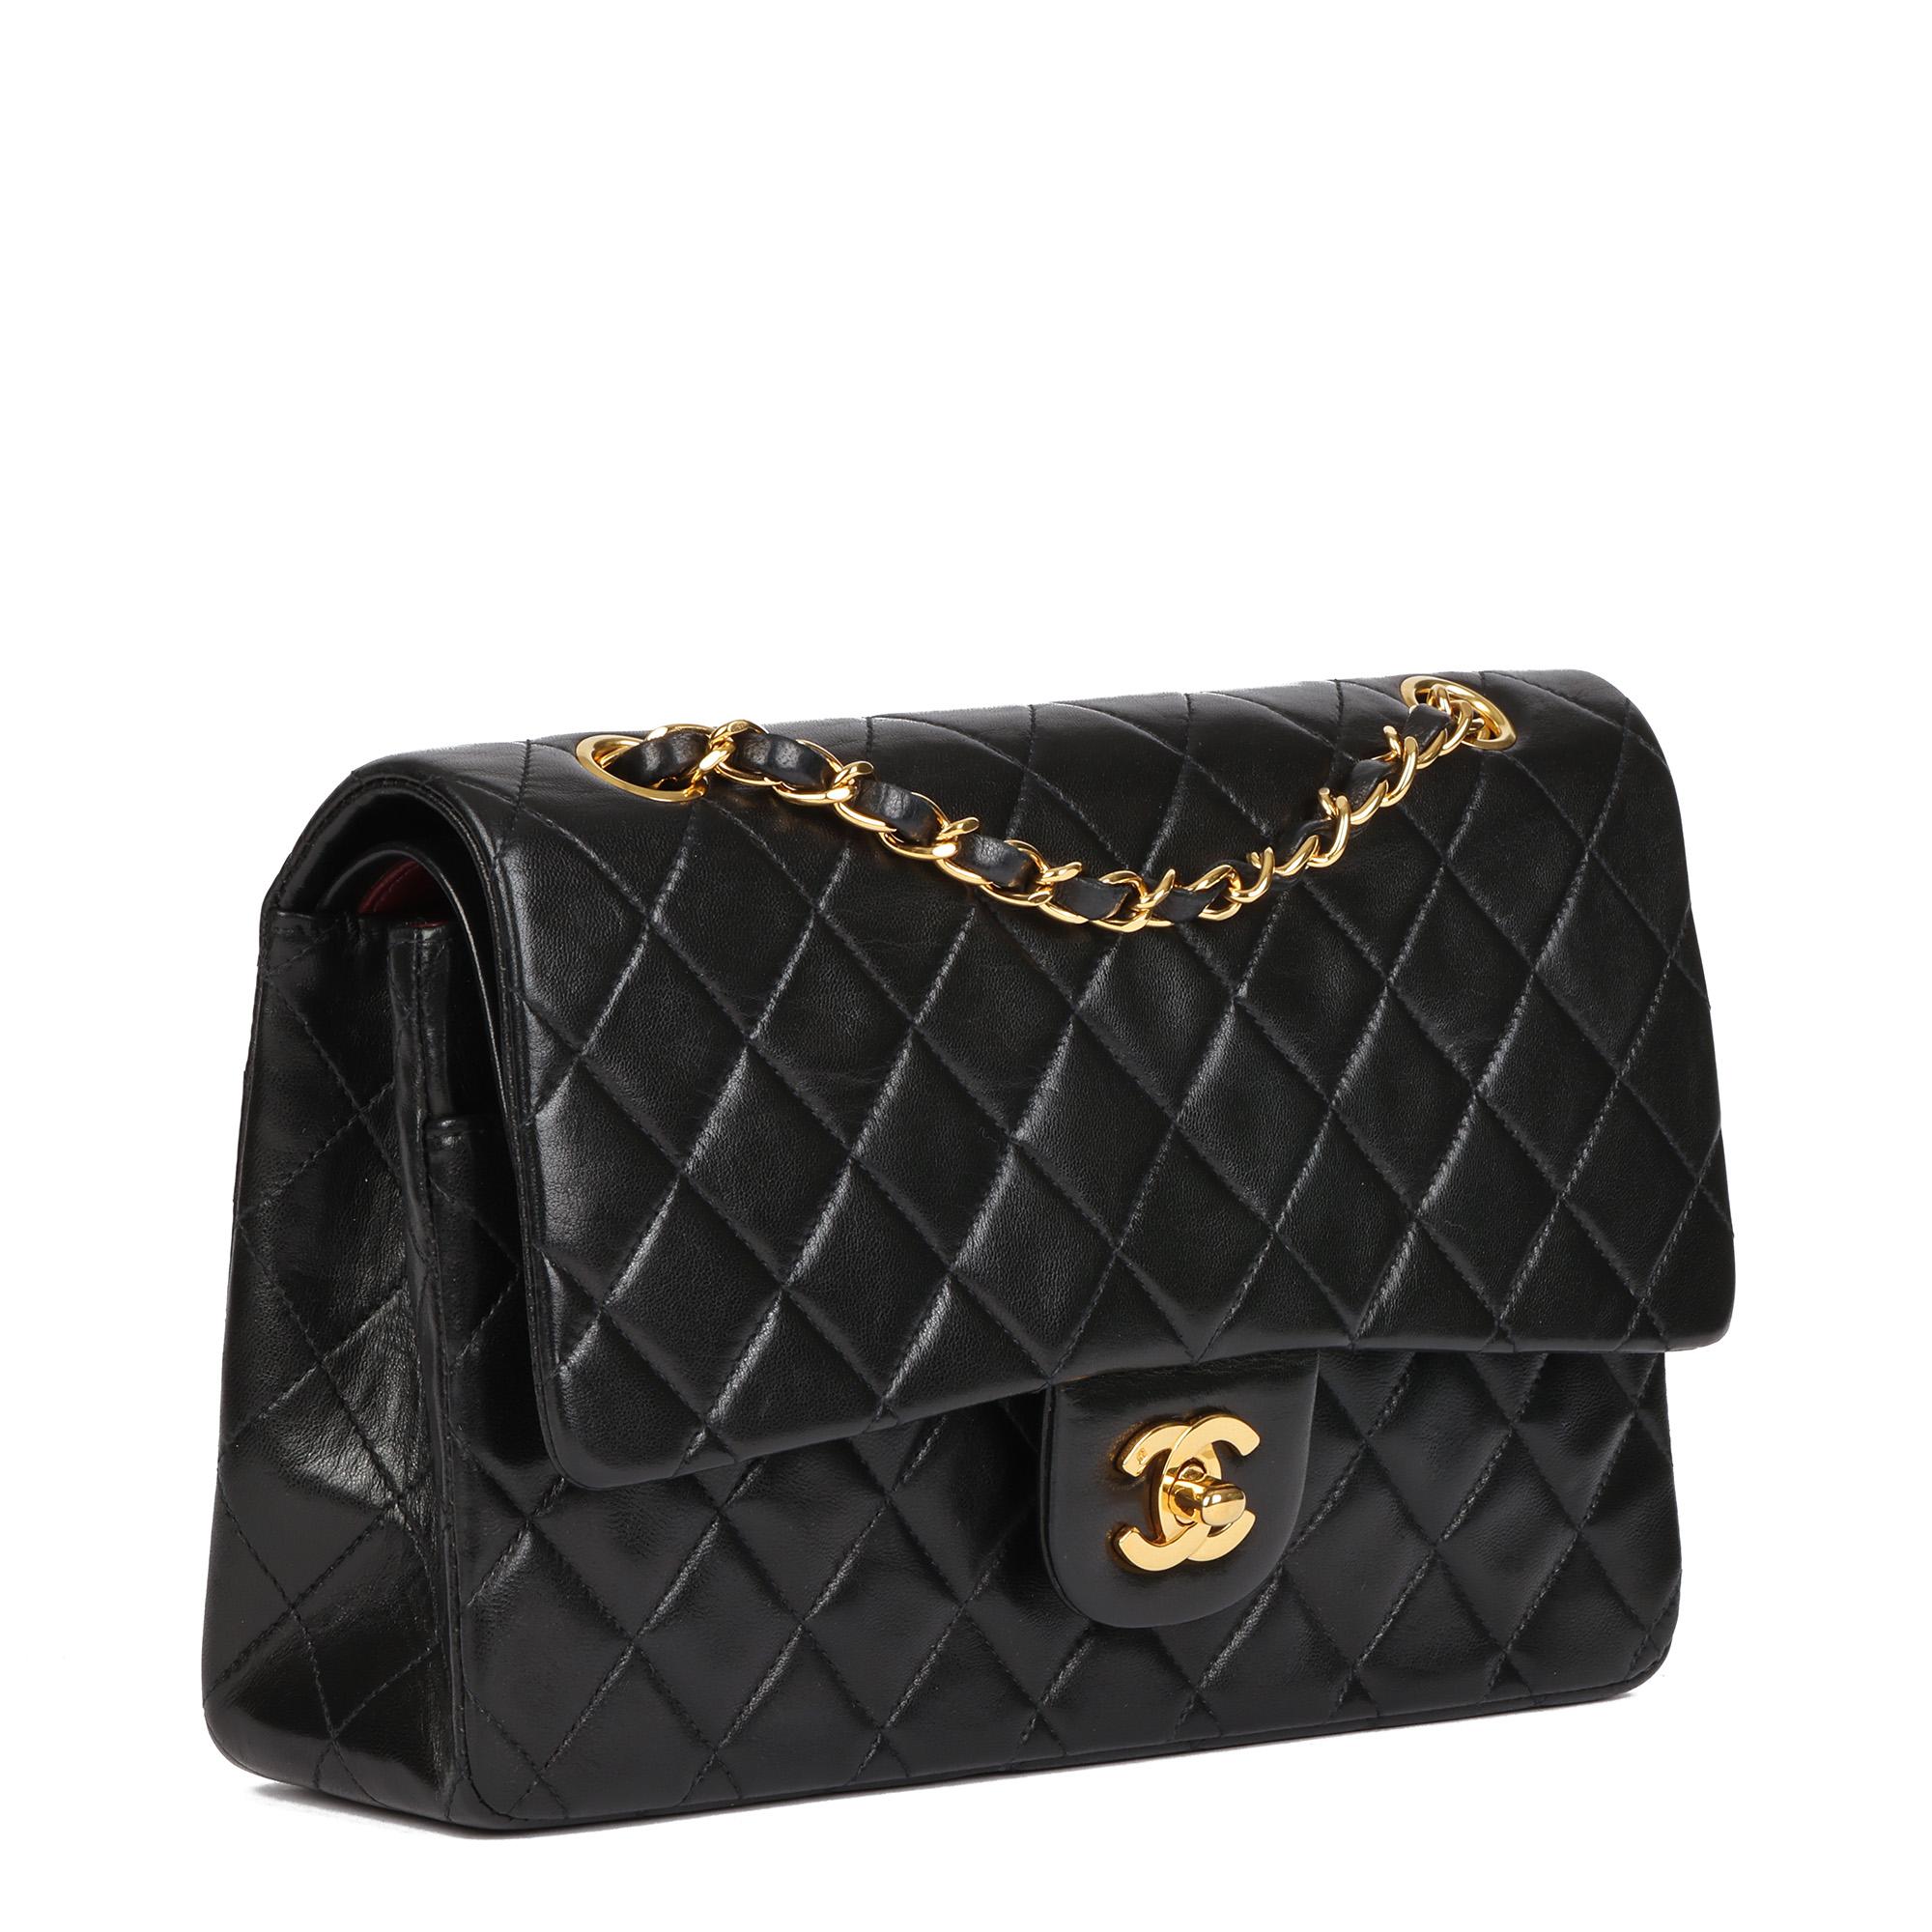 CHANEL
Black Quilted Lambskin Vintage Medium Classic Double Flap Bag

Xupes Reference: HB4581
Serial Number: 2408174
Age (Circa): 1992
Accompanied By: Chanel Dust Bag, Authenticity Card, Protective Felt
Authenticity Details: Authenticity Card,